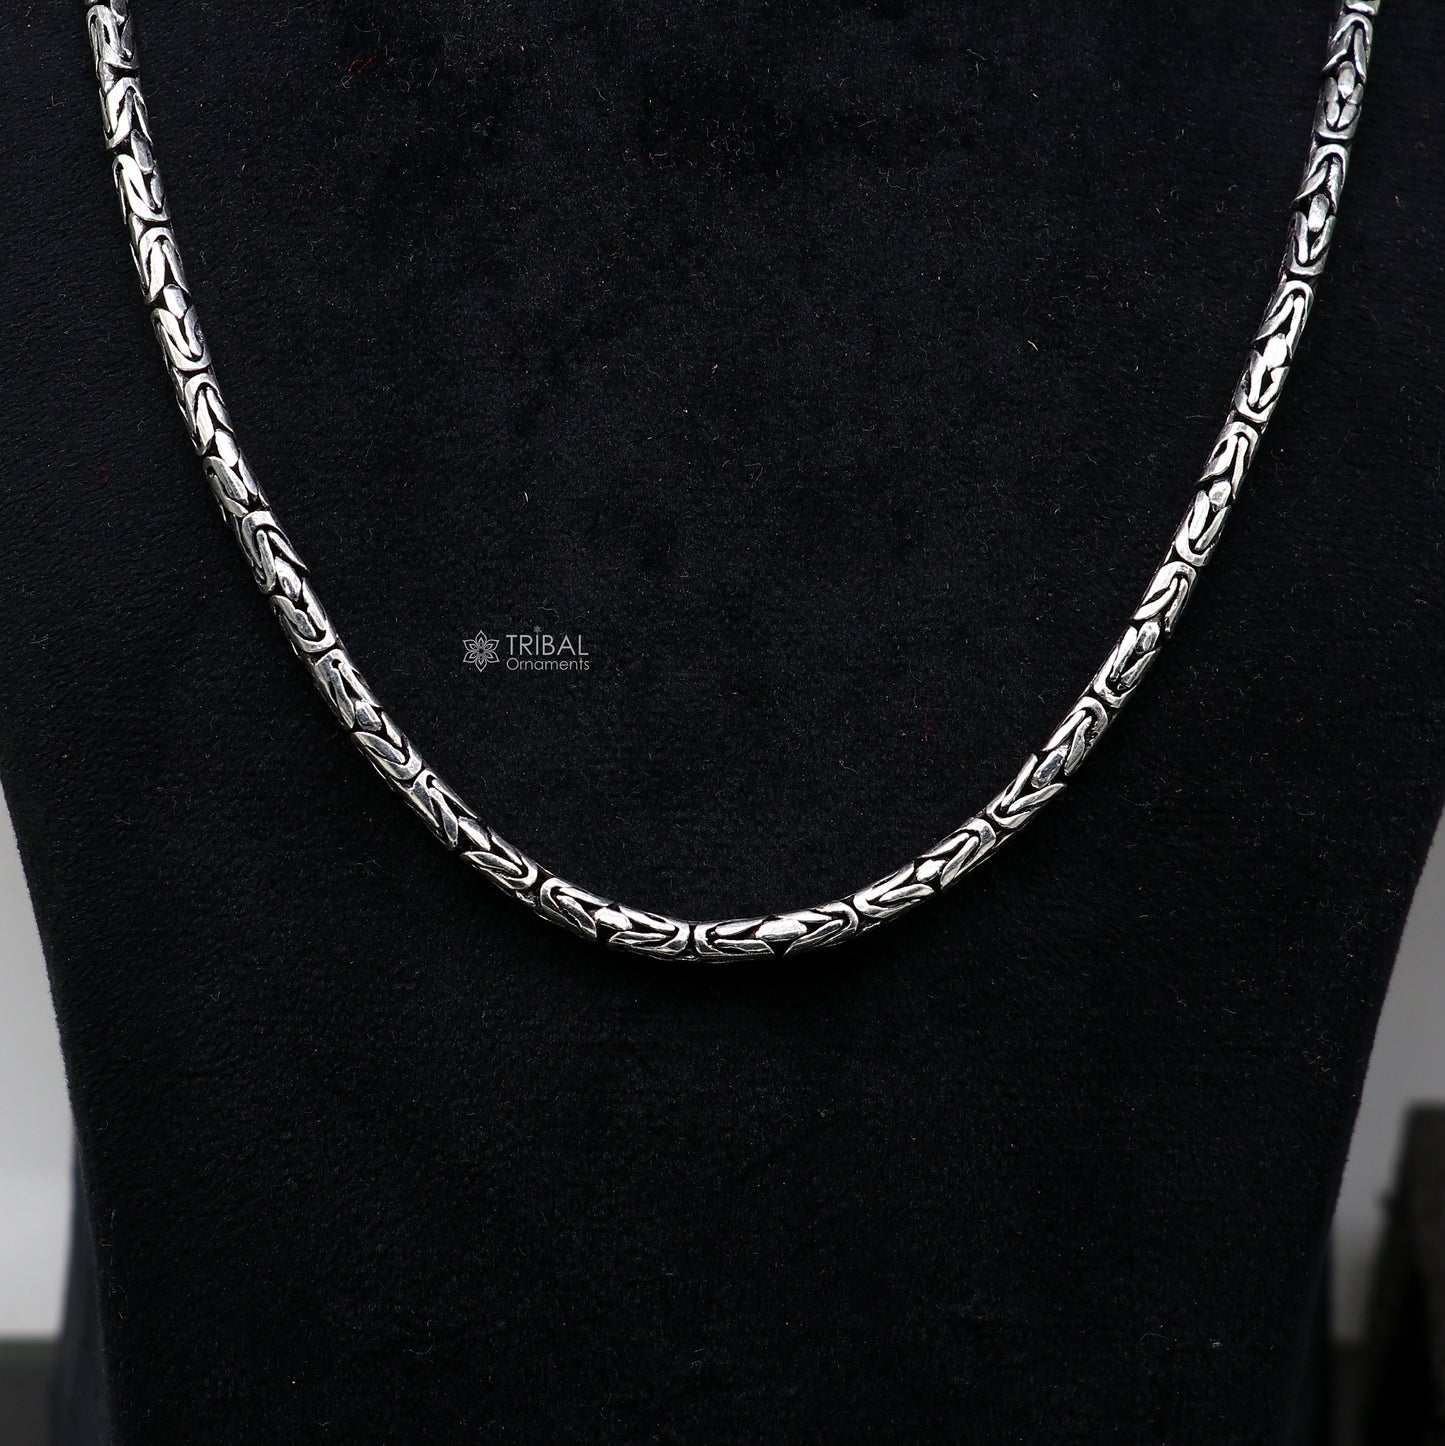 4mm 925 sterling silver handmade solid vintage byzantine design chain heavy  necklace, amazing luxury royal gifting designer jewelry ch563 - TRIBAL ORNAMENTS